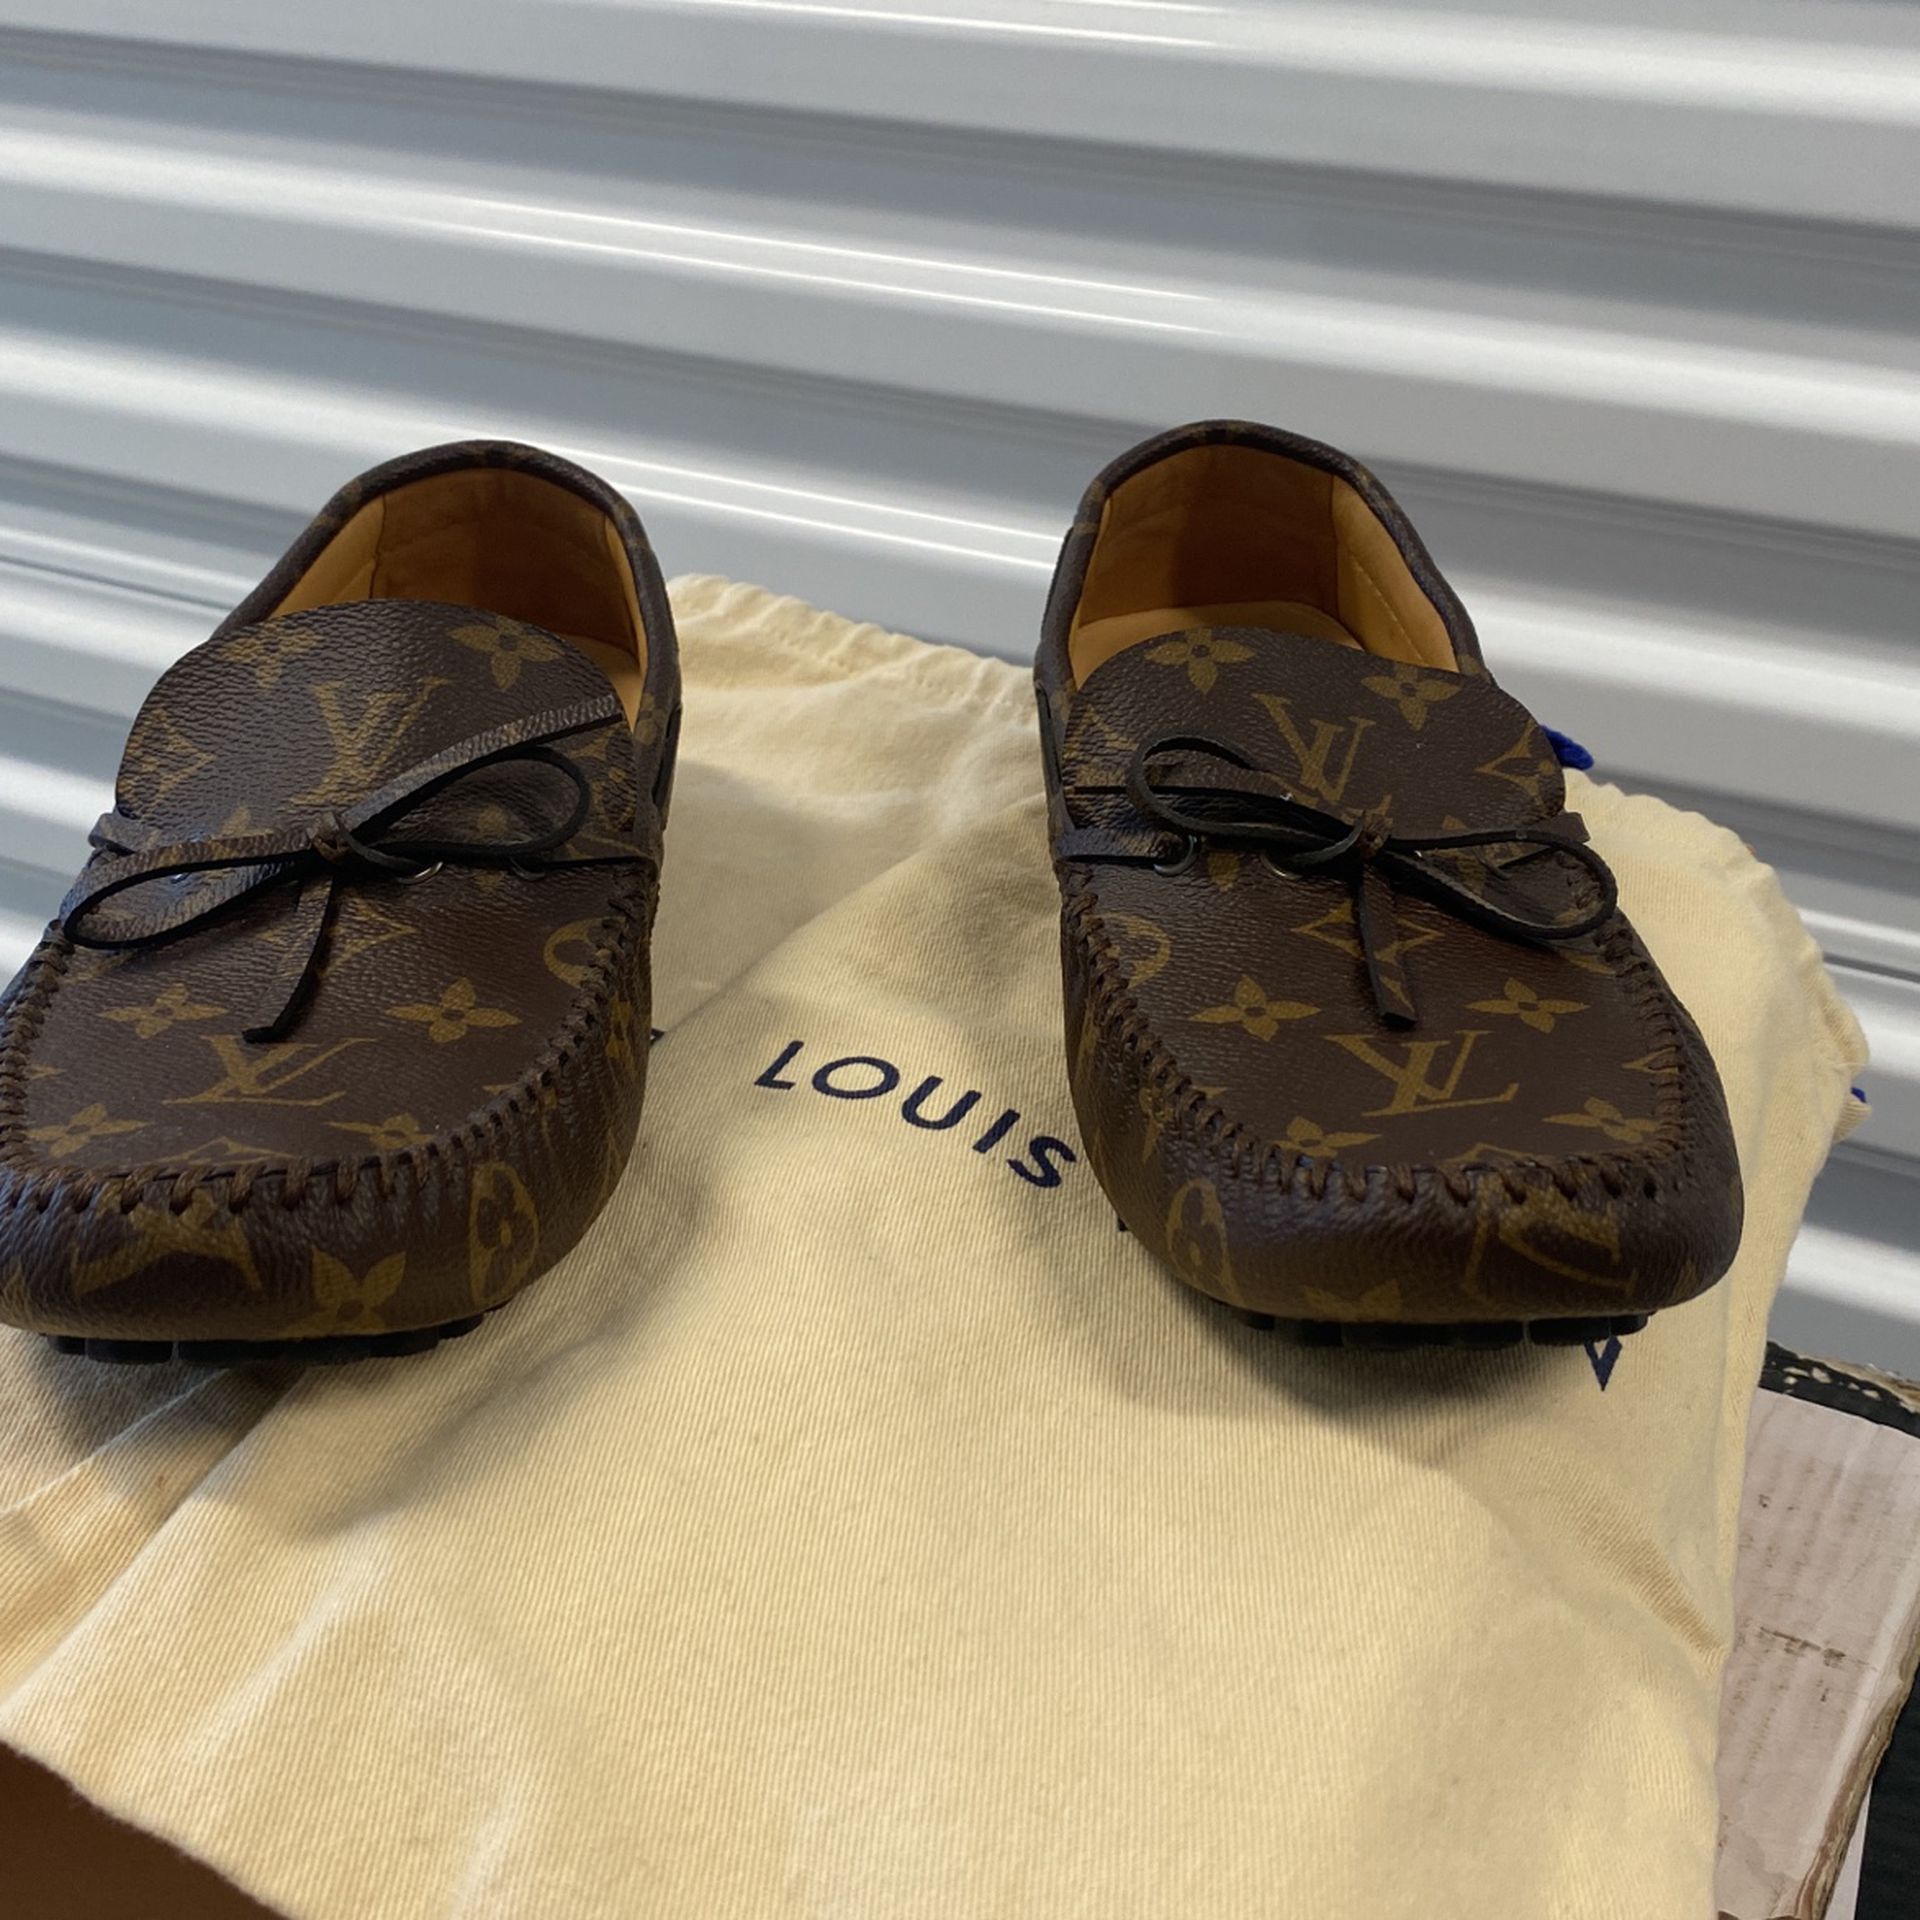 Louis Vuitton Brand New Good Condition for Sale in San Jose, CA